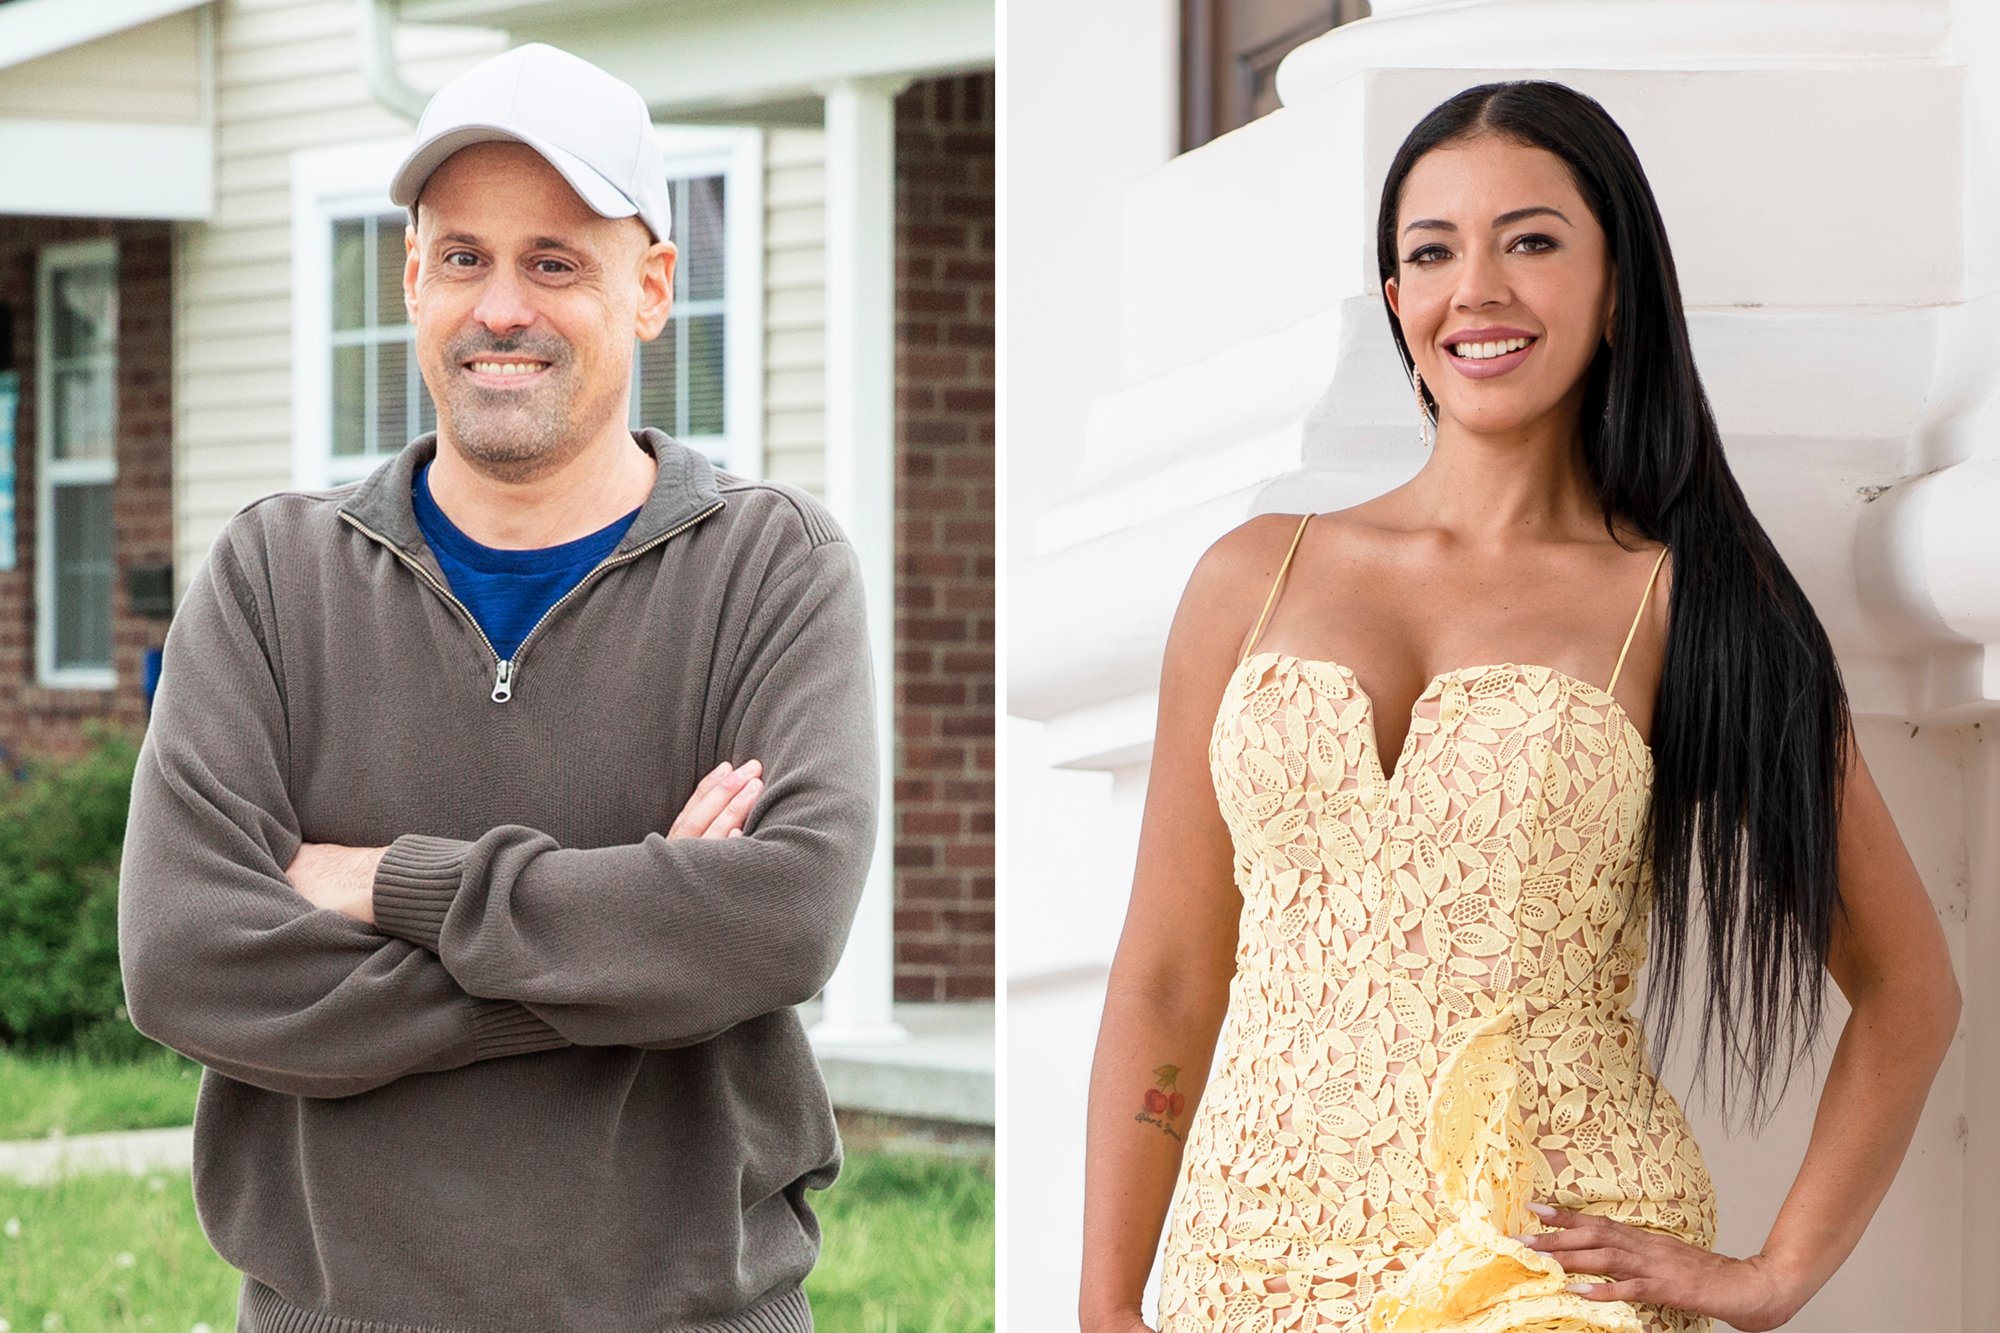 'Before the 90 Days' Season 5 couple Gino and Jasmine with Gino wearing a quarter zip sweater and hat while Jasmine wears a yellow sundress